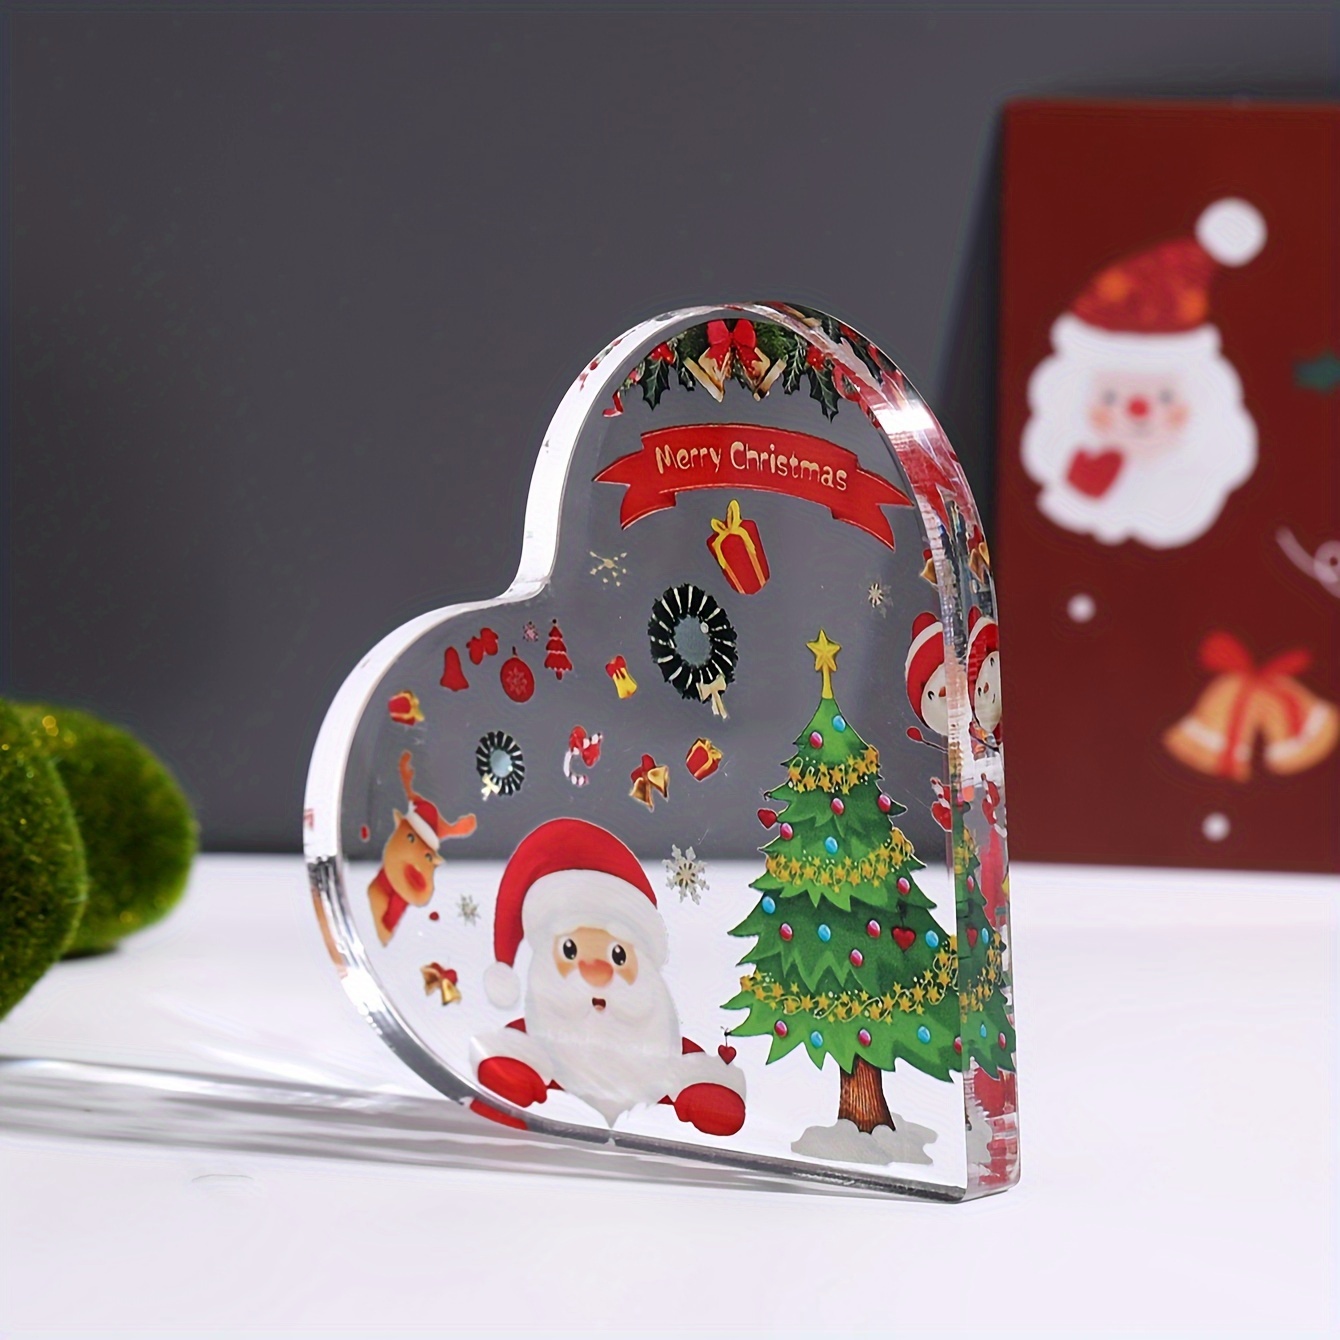 1pc, Unique Christmas Gifts & Christmas Decorations For Indoor Home Decor,  Heart Shaped Acrylic Printed With Merry Christmas Patterns For Christmas Ta